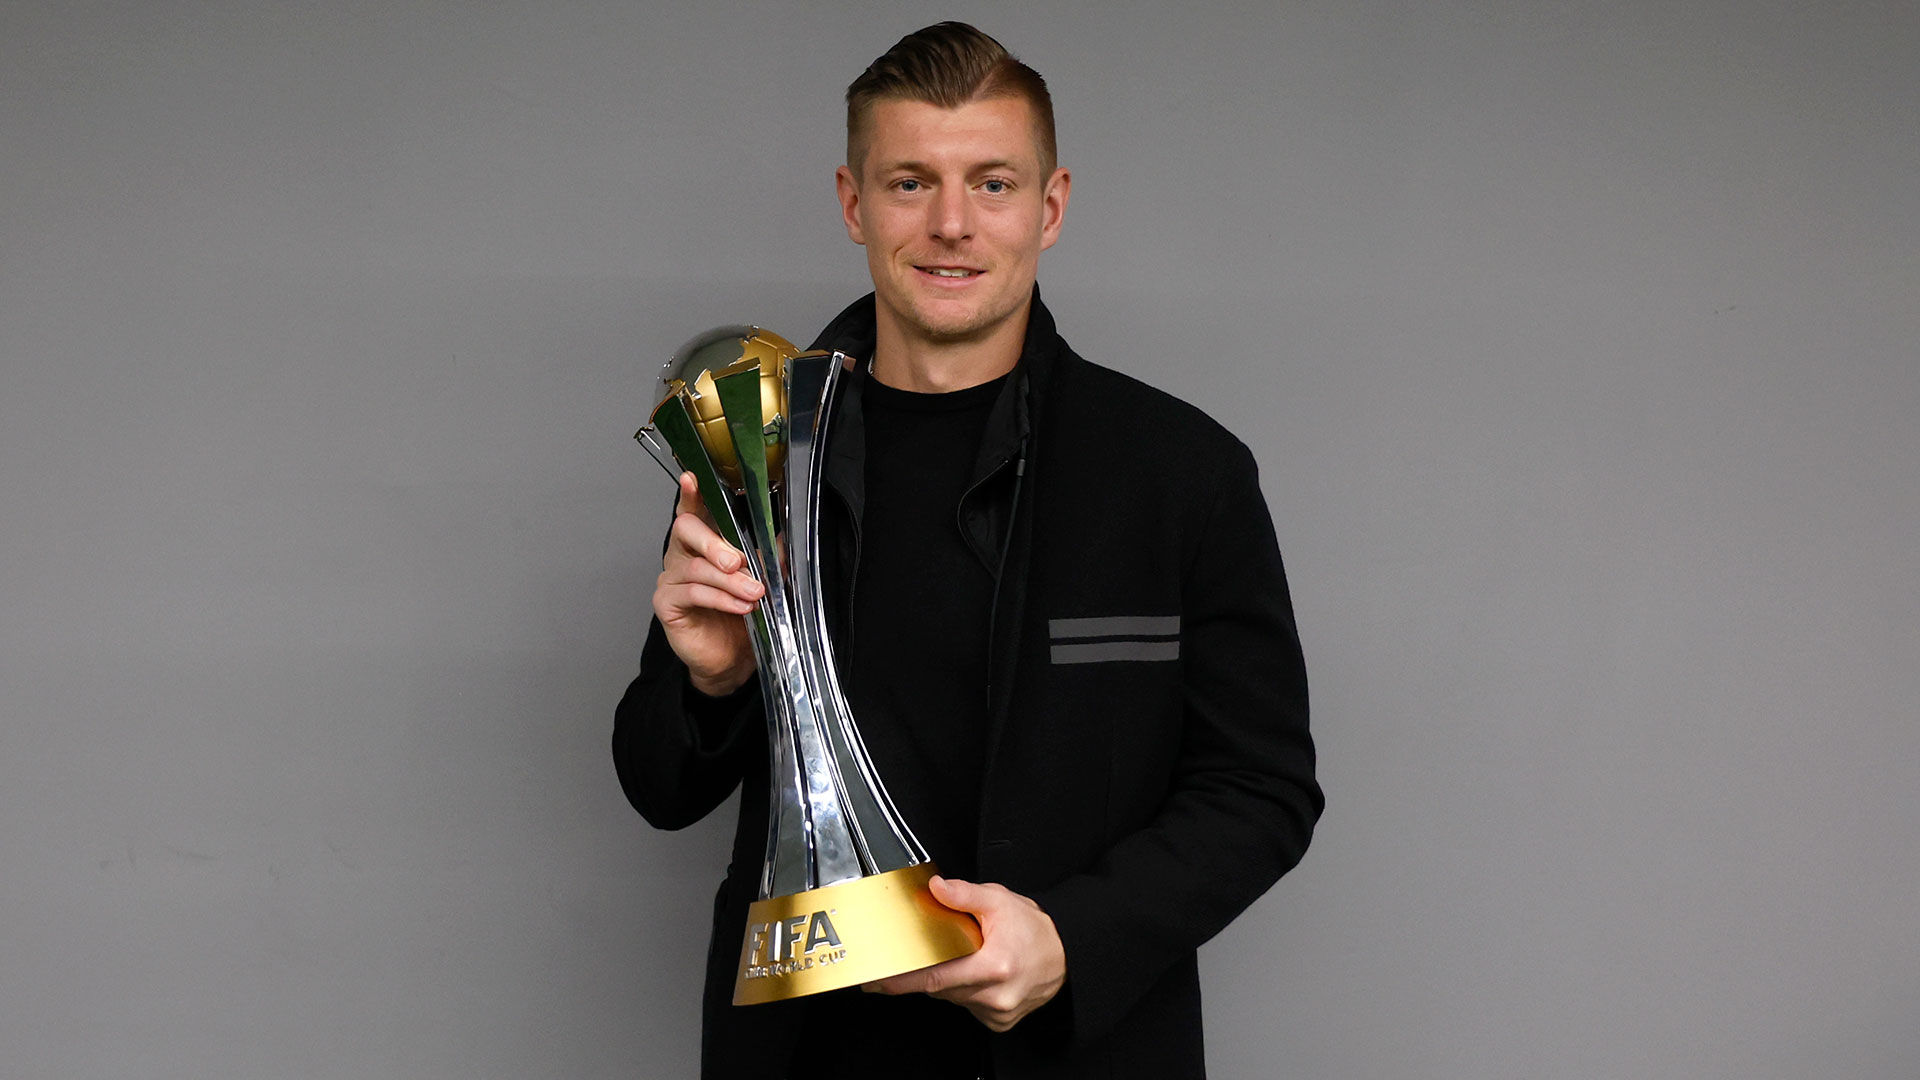 Sixth Club World Cup Crown for Kroos